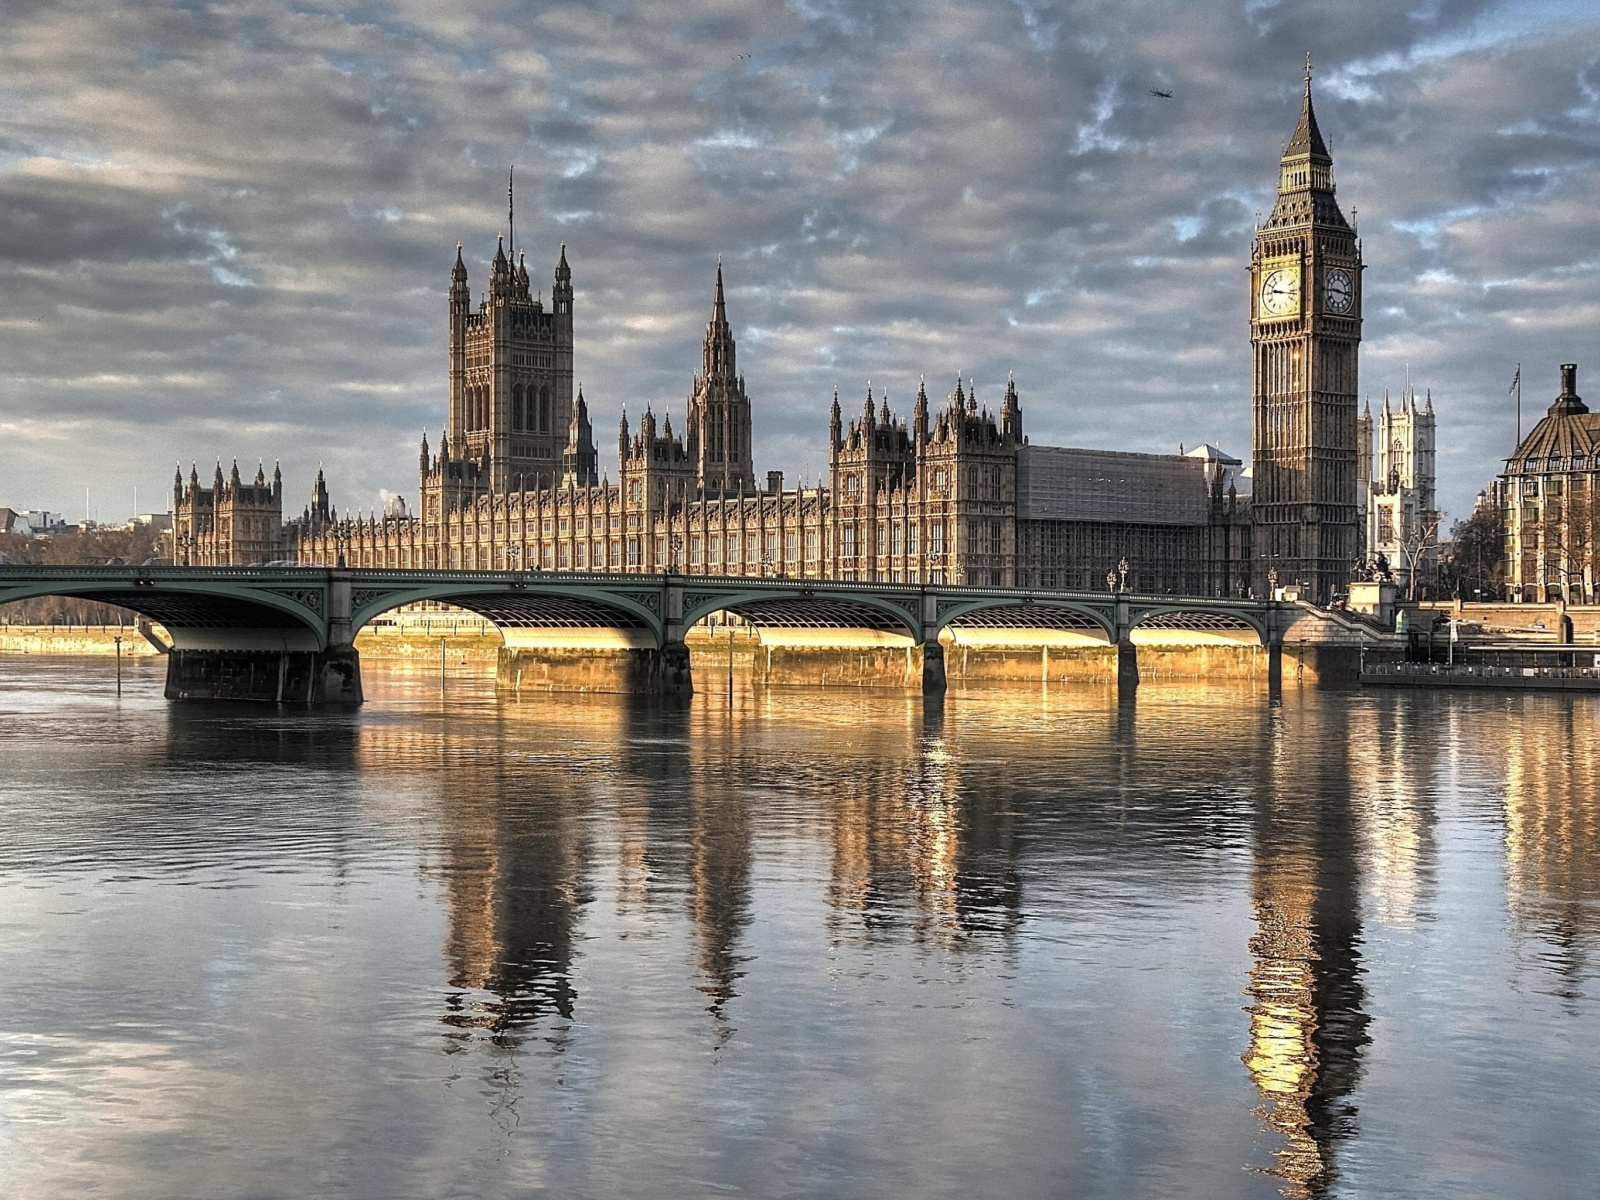 Das Palace of Westminster in London Wallpaper 1600x1200